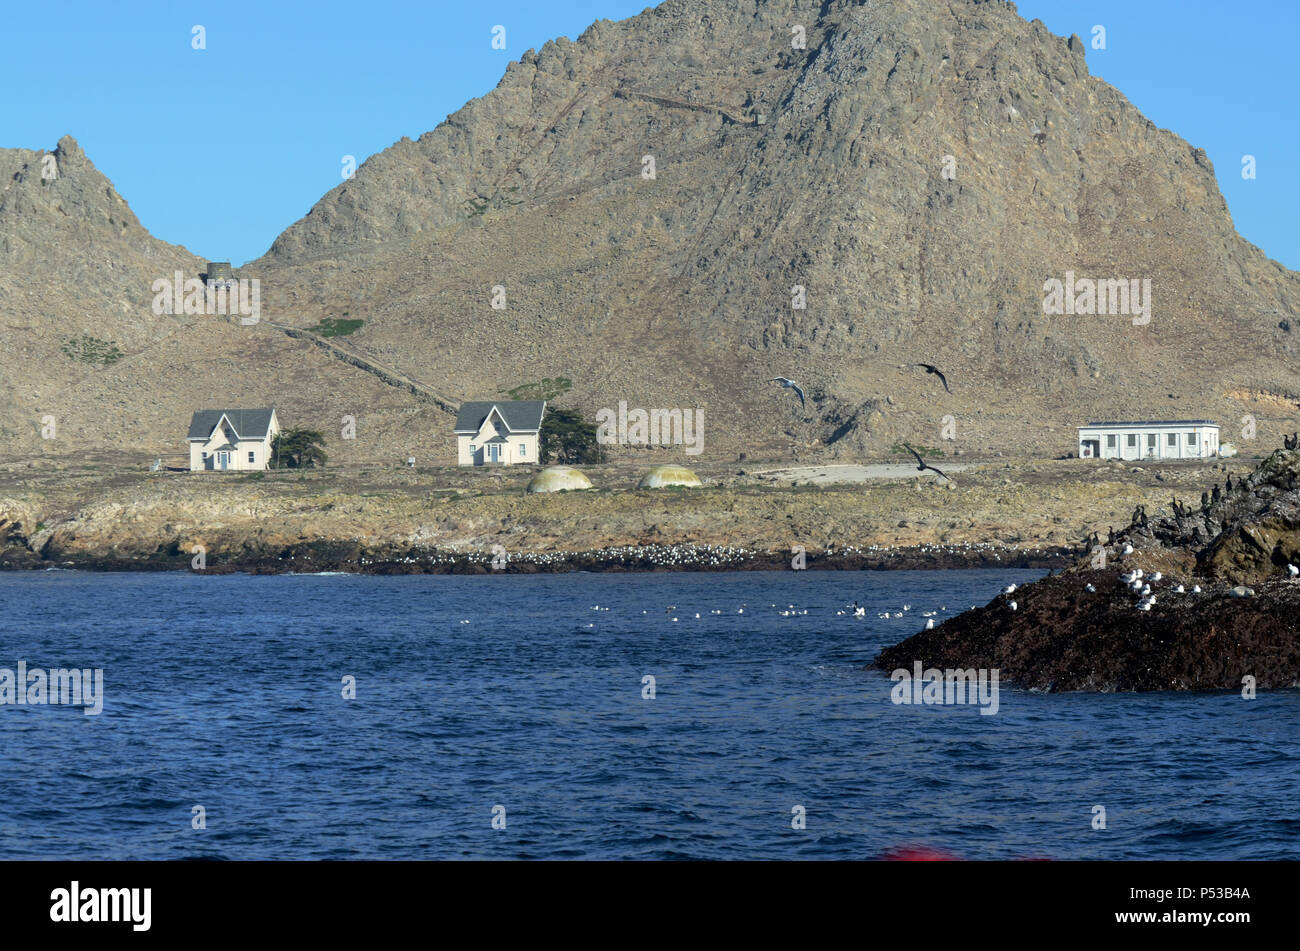 Houses and building on the Southeast Farallon Island, where scientific researchers live on the island. Edge of small island with shore and seabirds Stock Photo